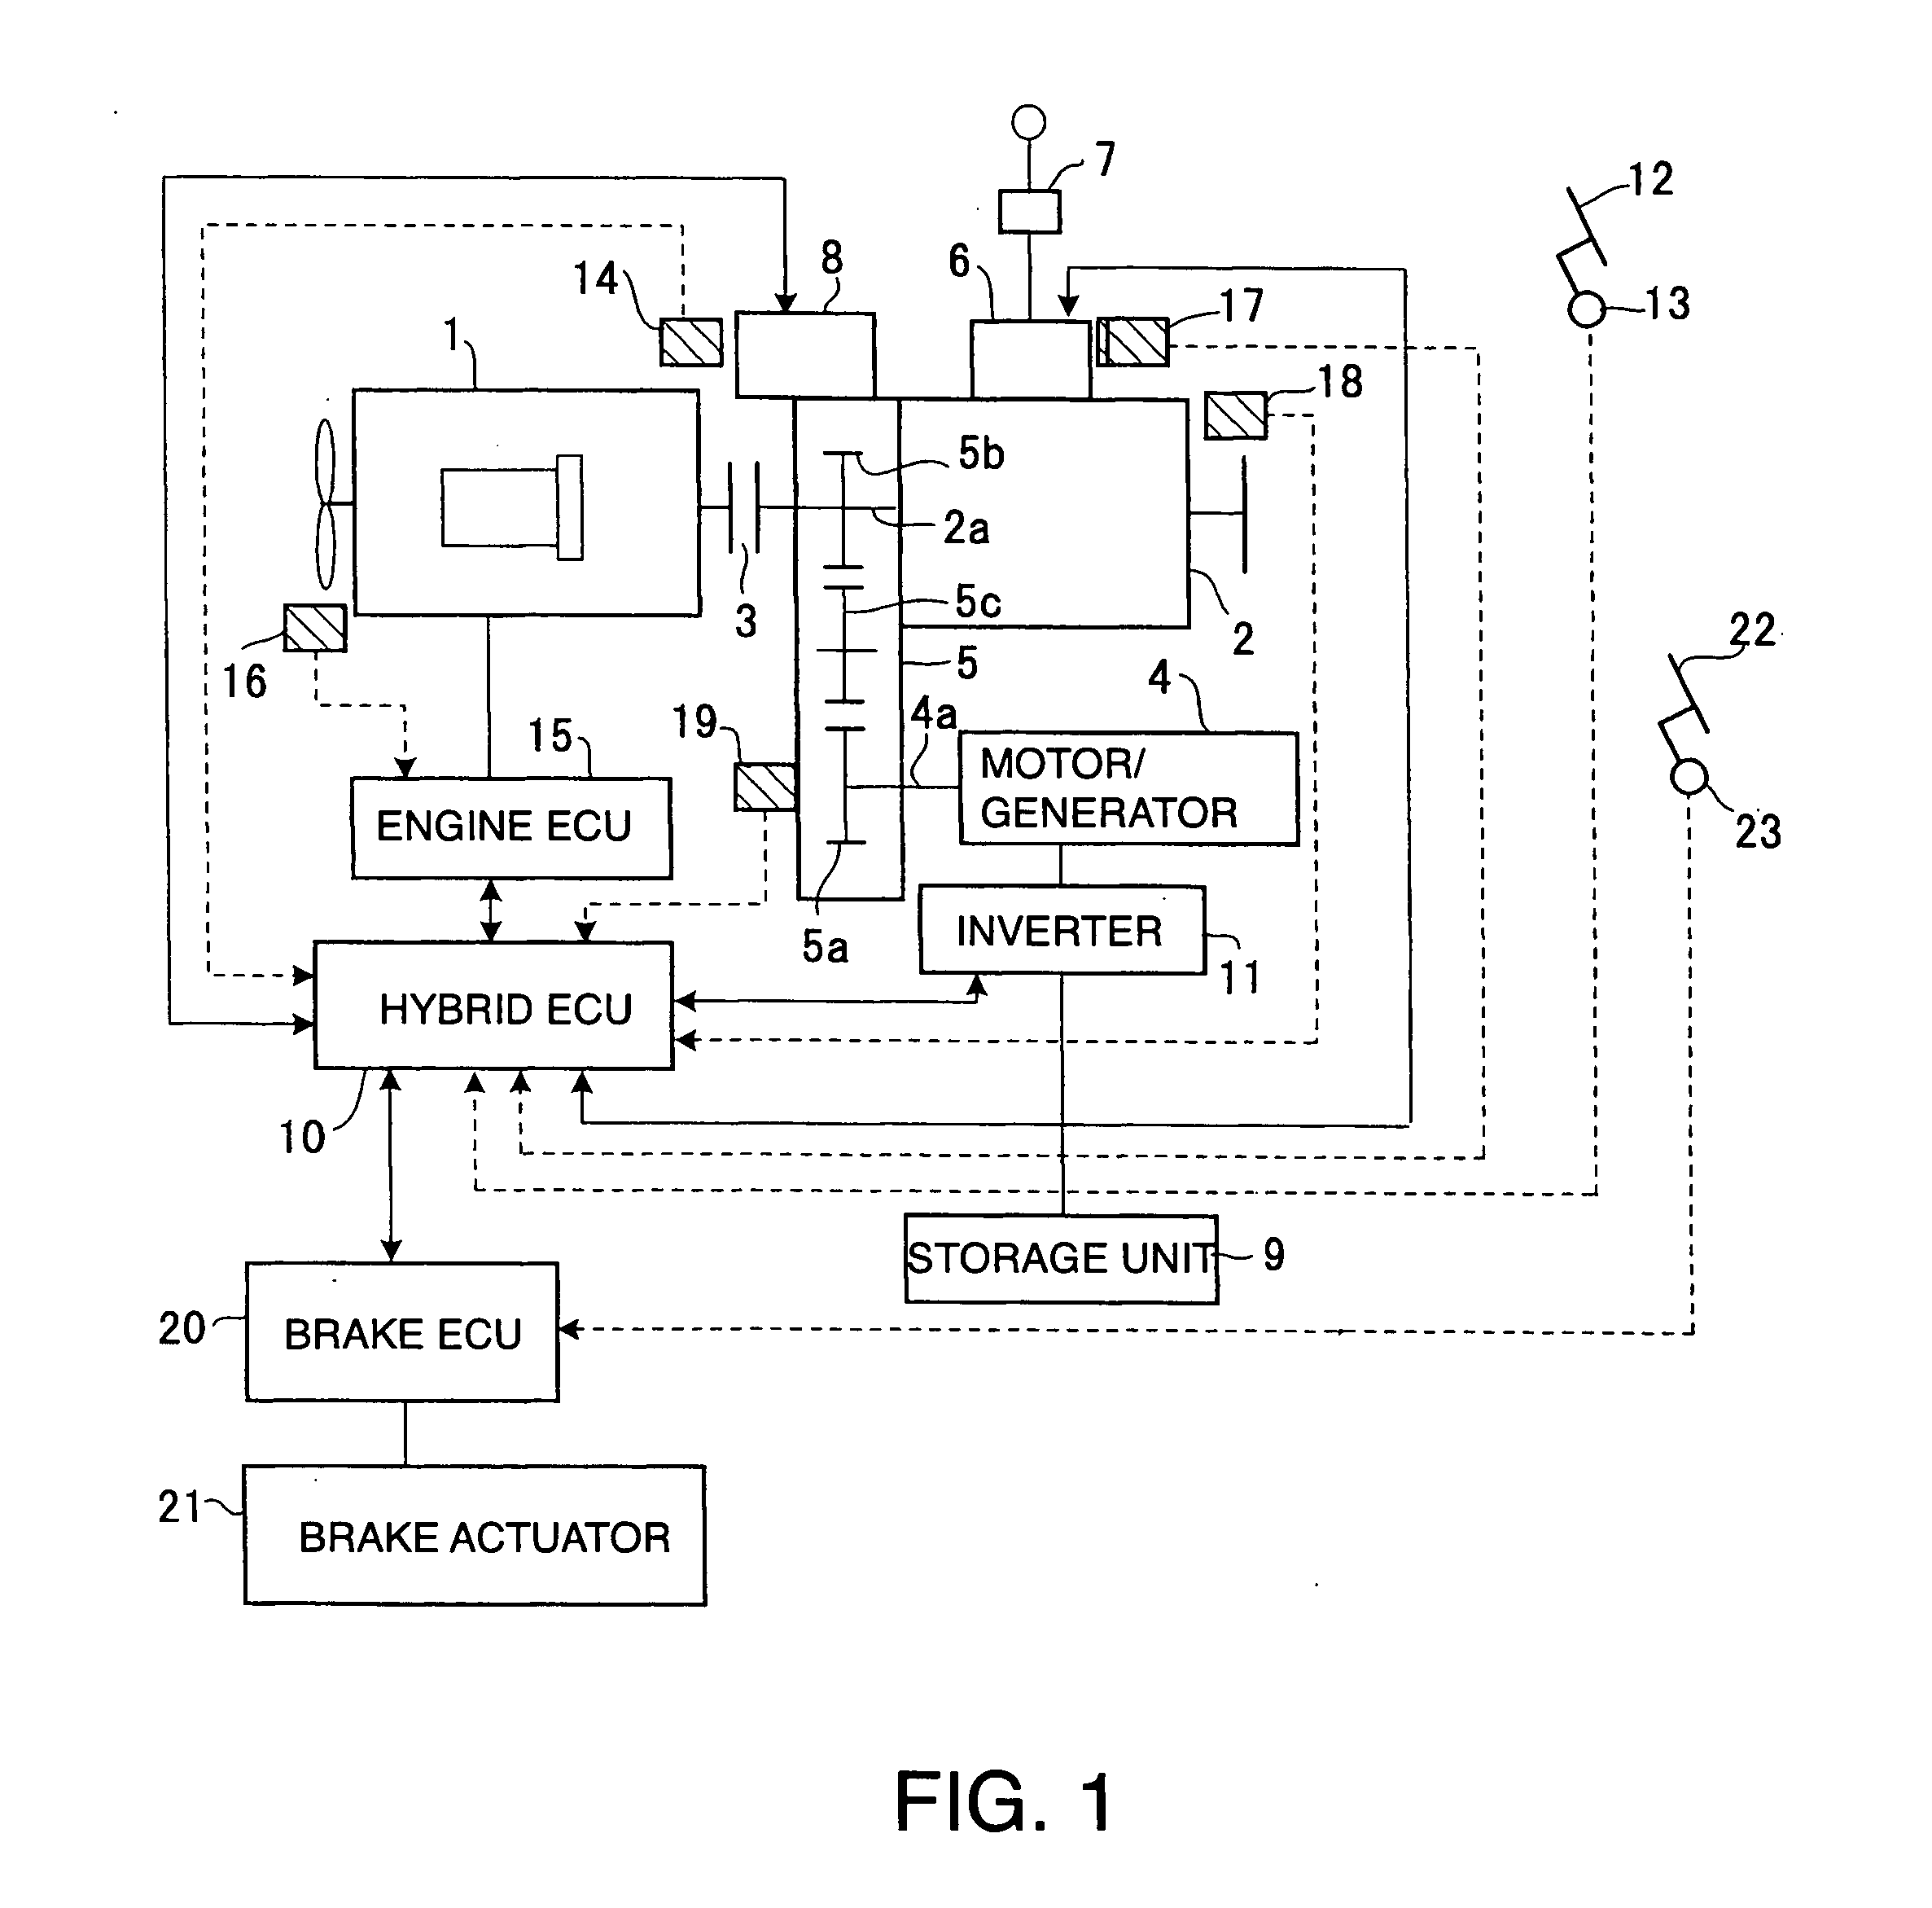 Gear shift control system of hybrid vehicle